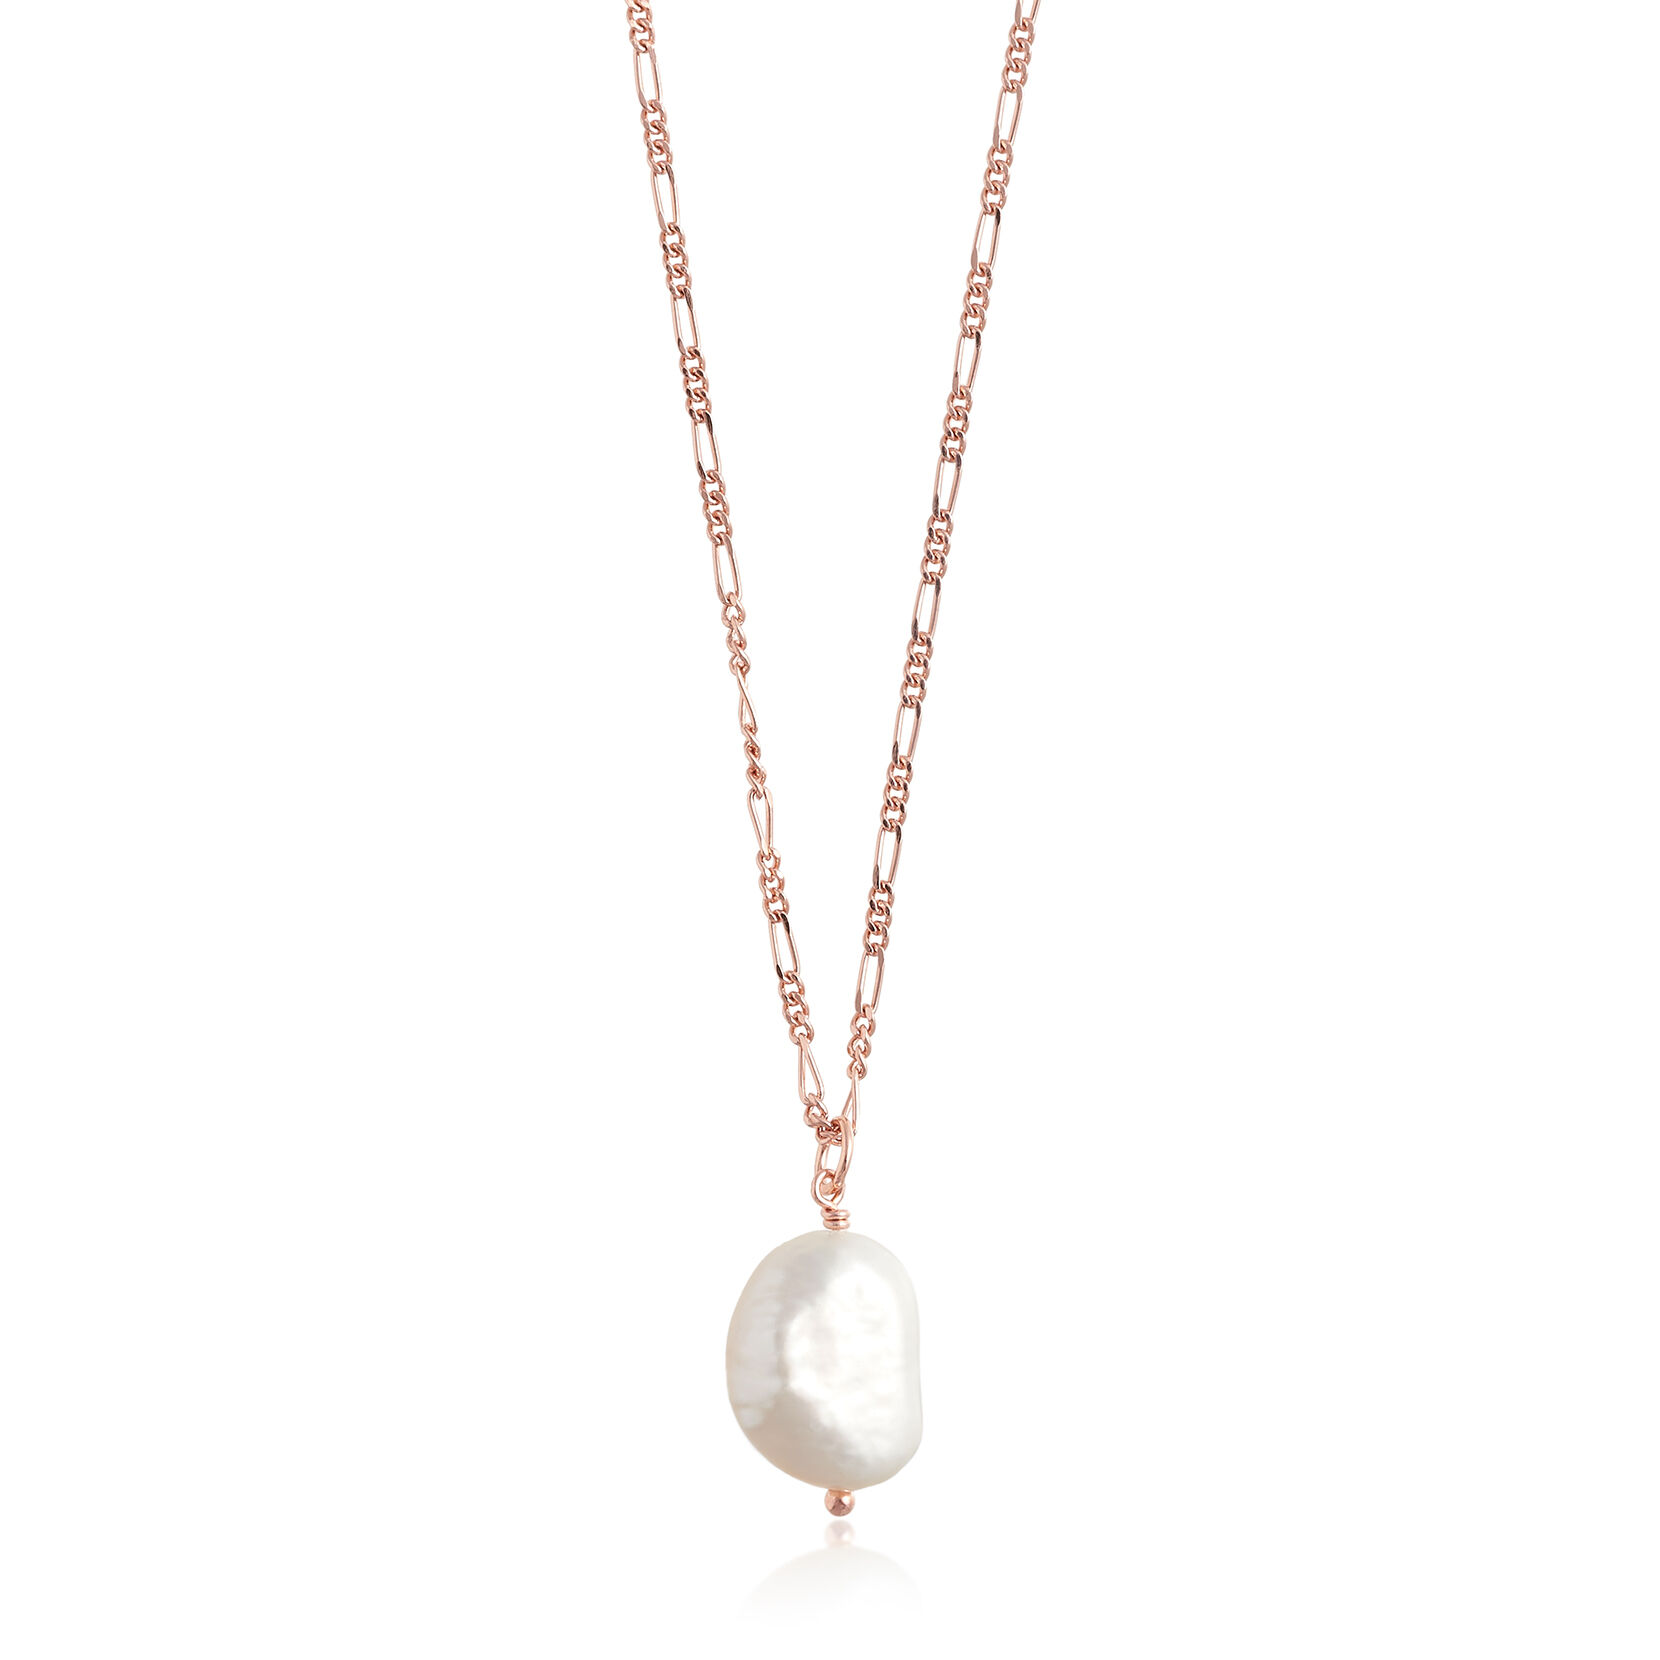 Ladies Olivia Burton Jewellery Rose Gold Plated Moulded Bee & Ball Necklace  (OBJ16AMN13) | WatchShop.com™